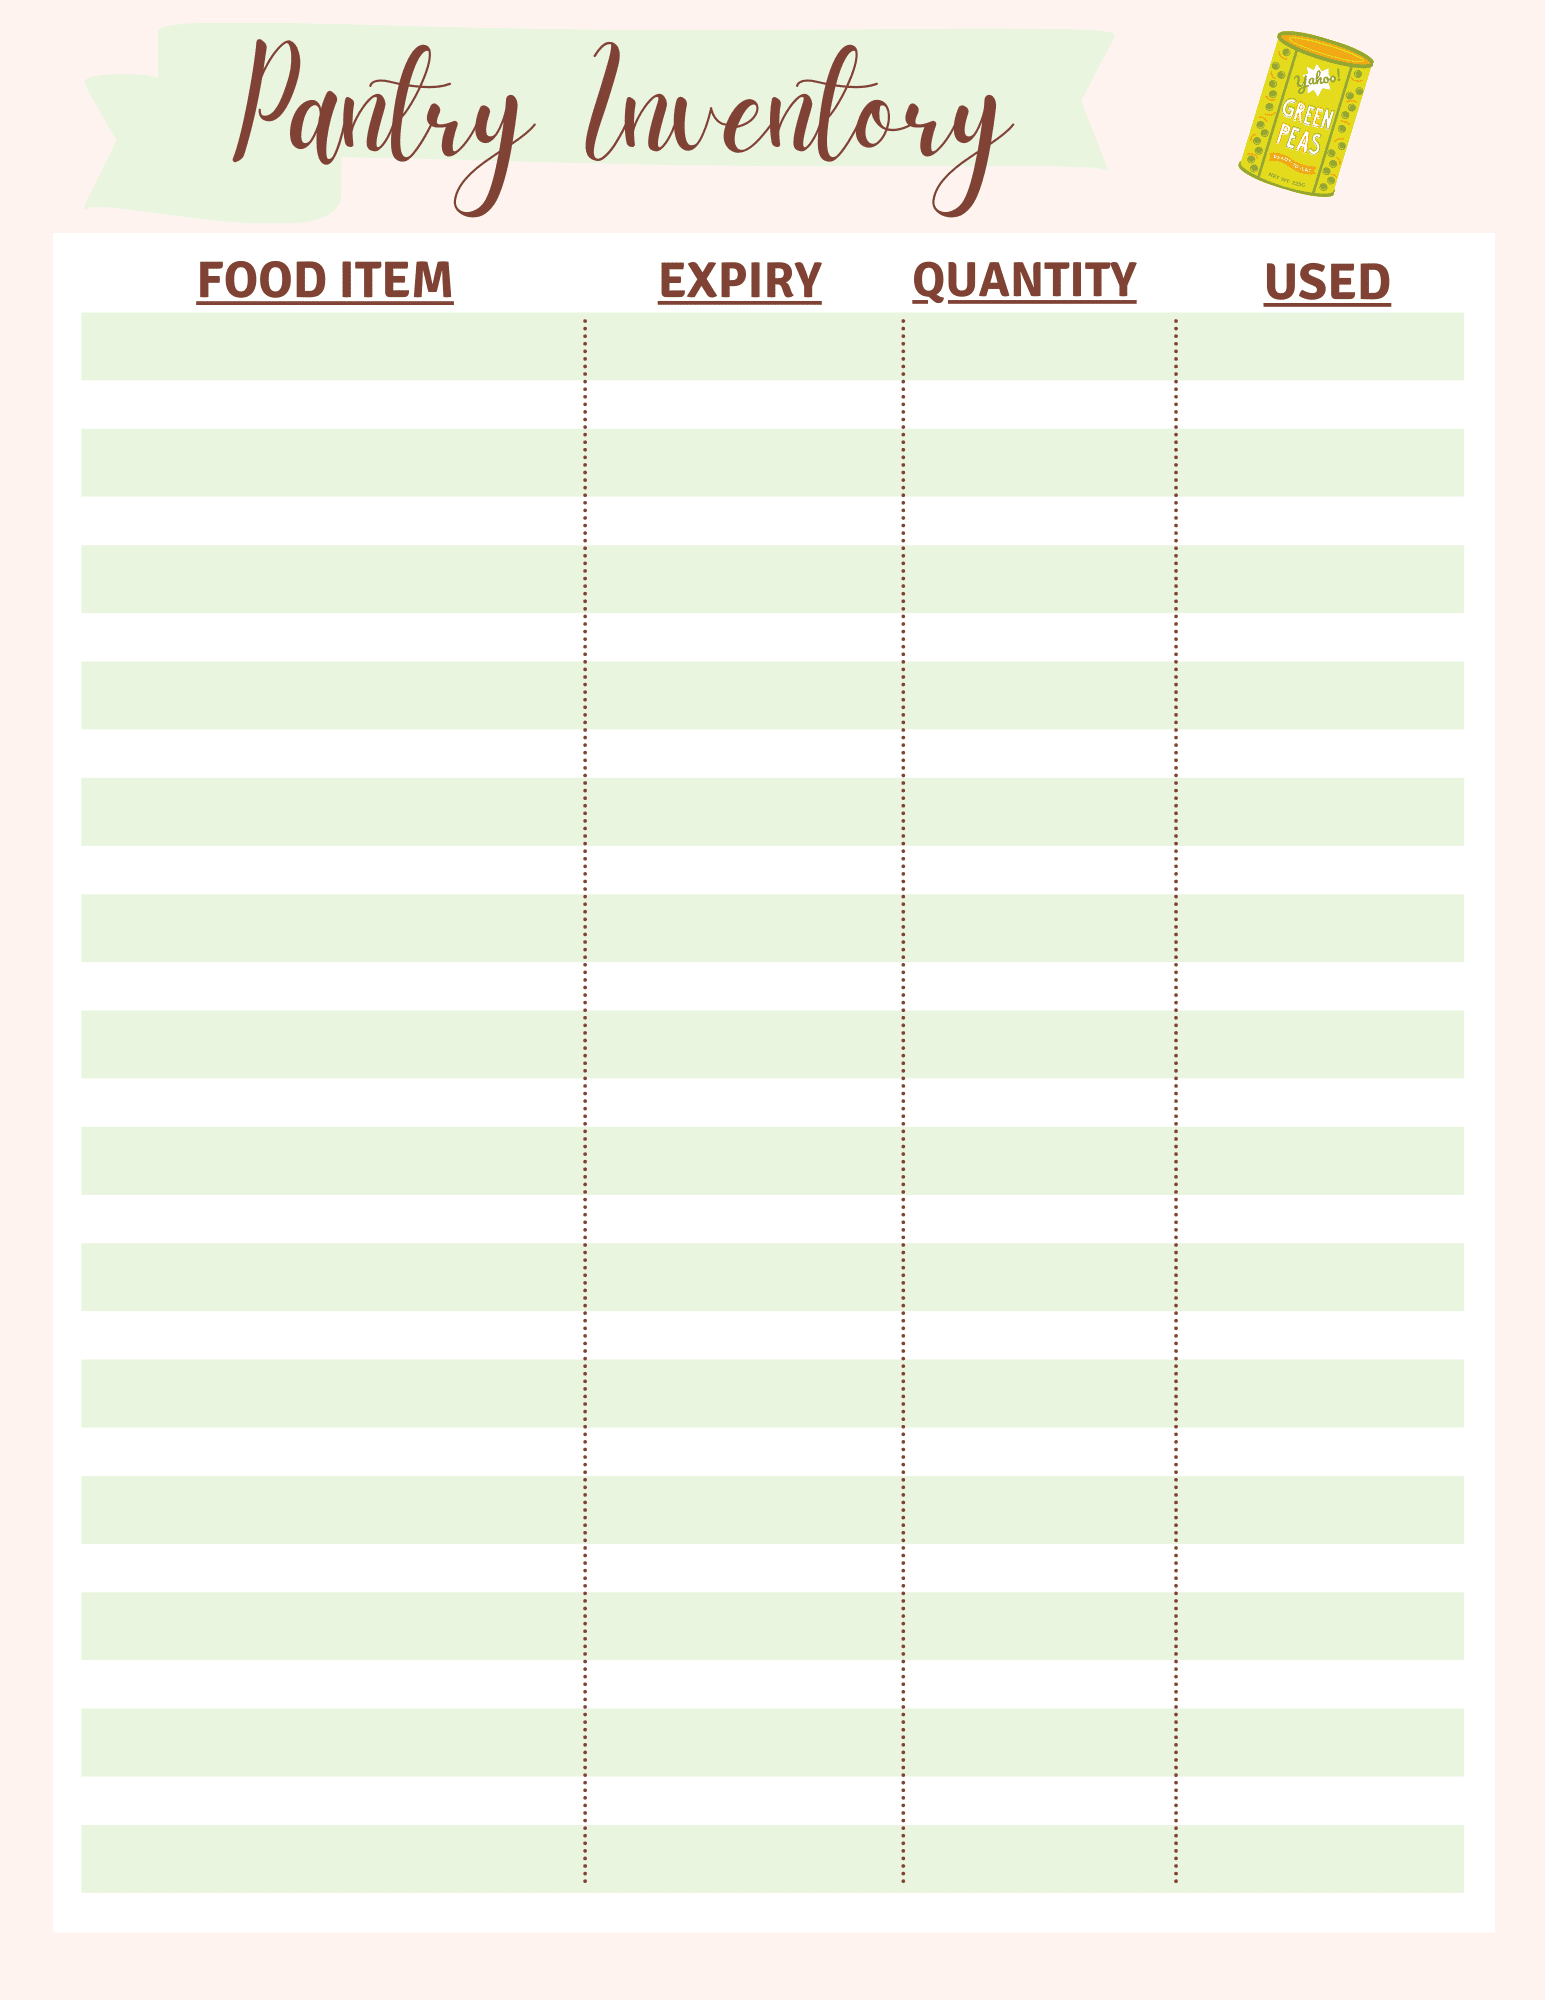 Pantry Inventory Template